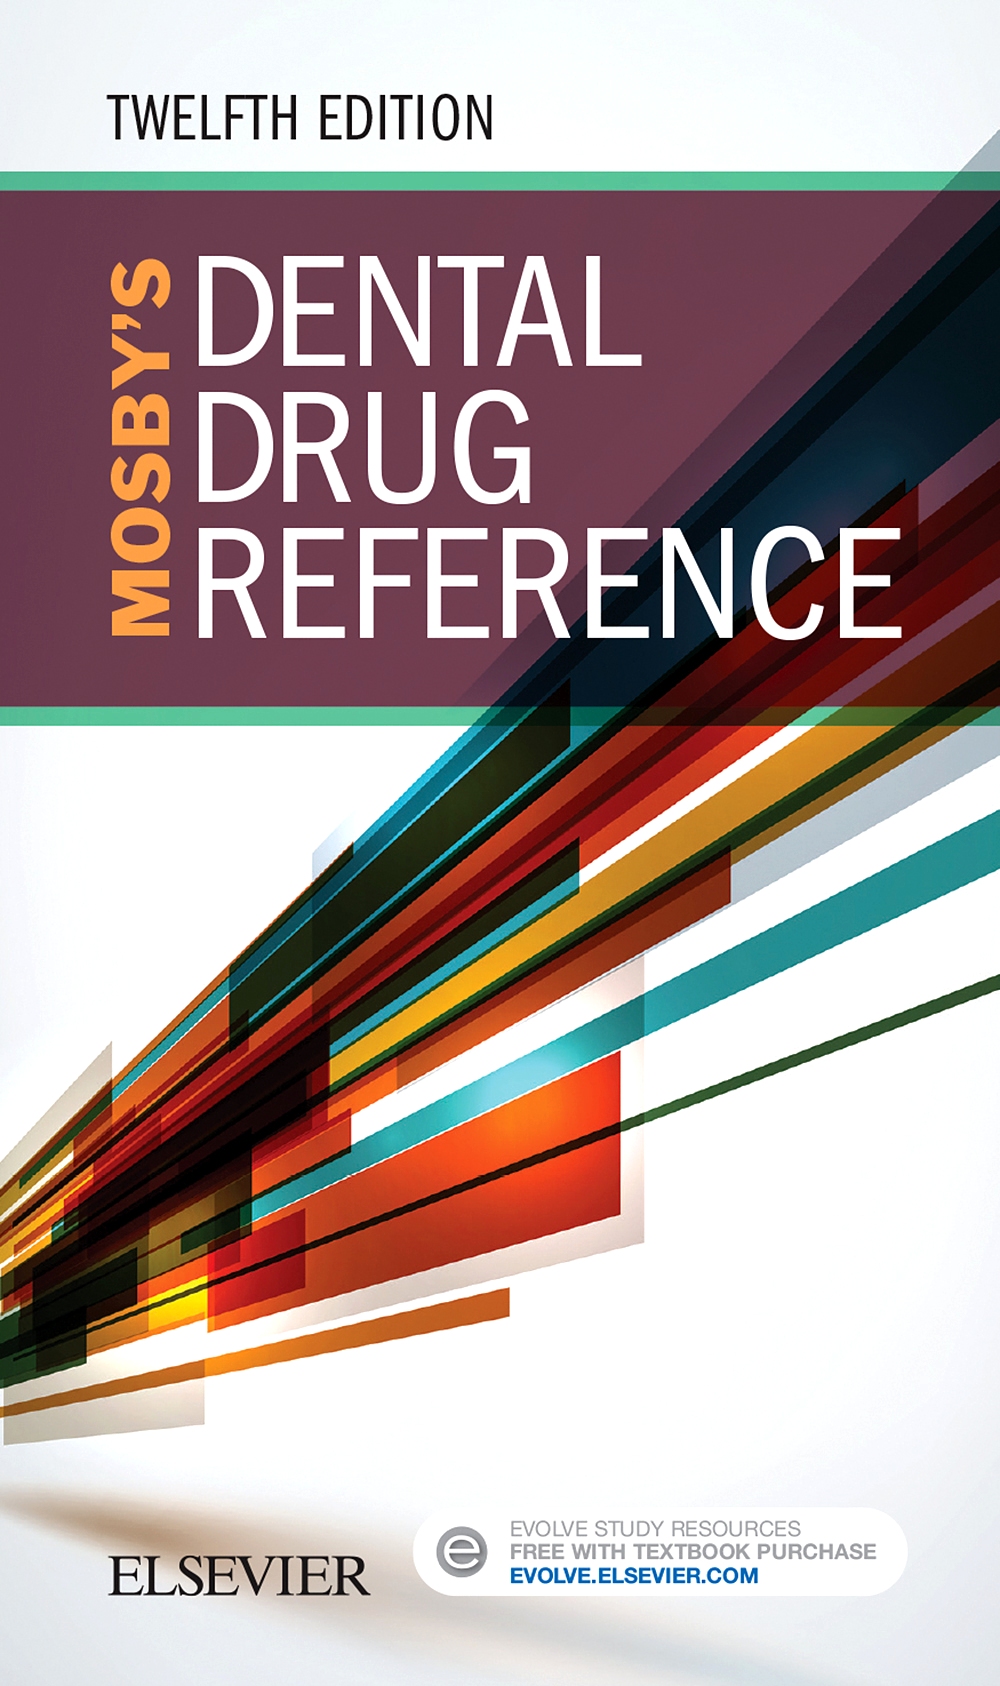 Evolve Resources for Mosby's Dental Drug Reference, 12th Edition